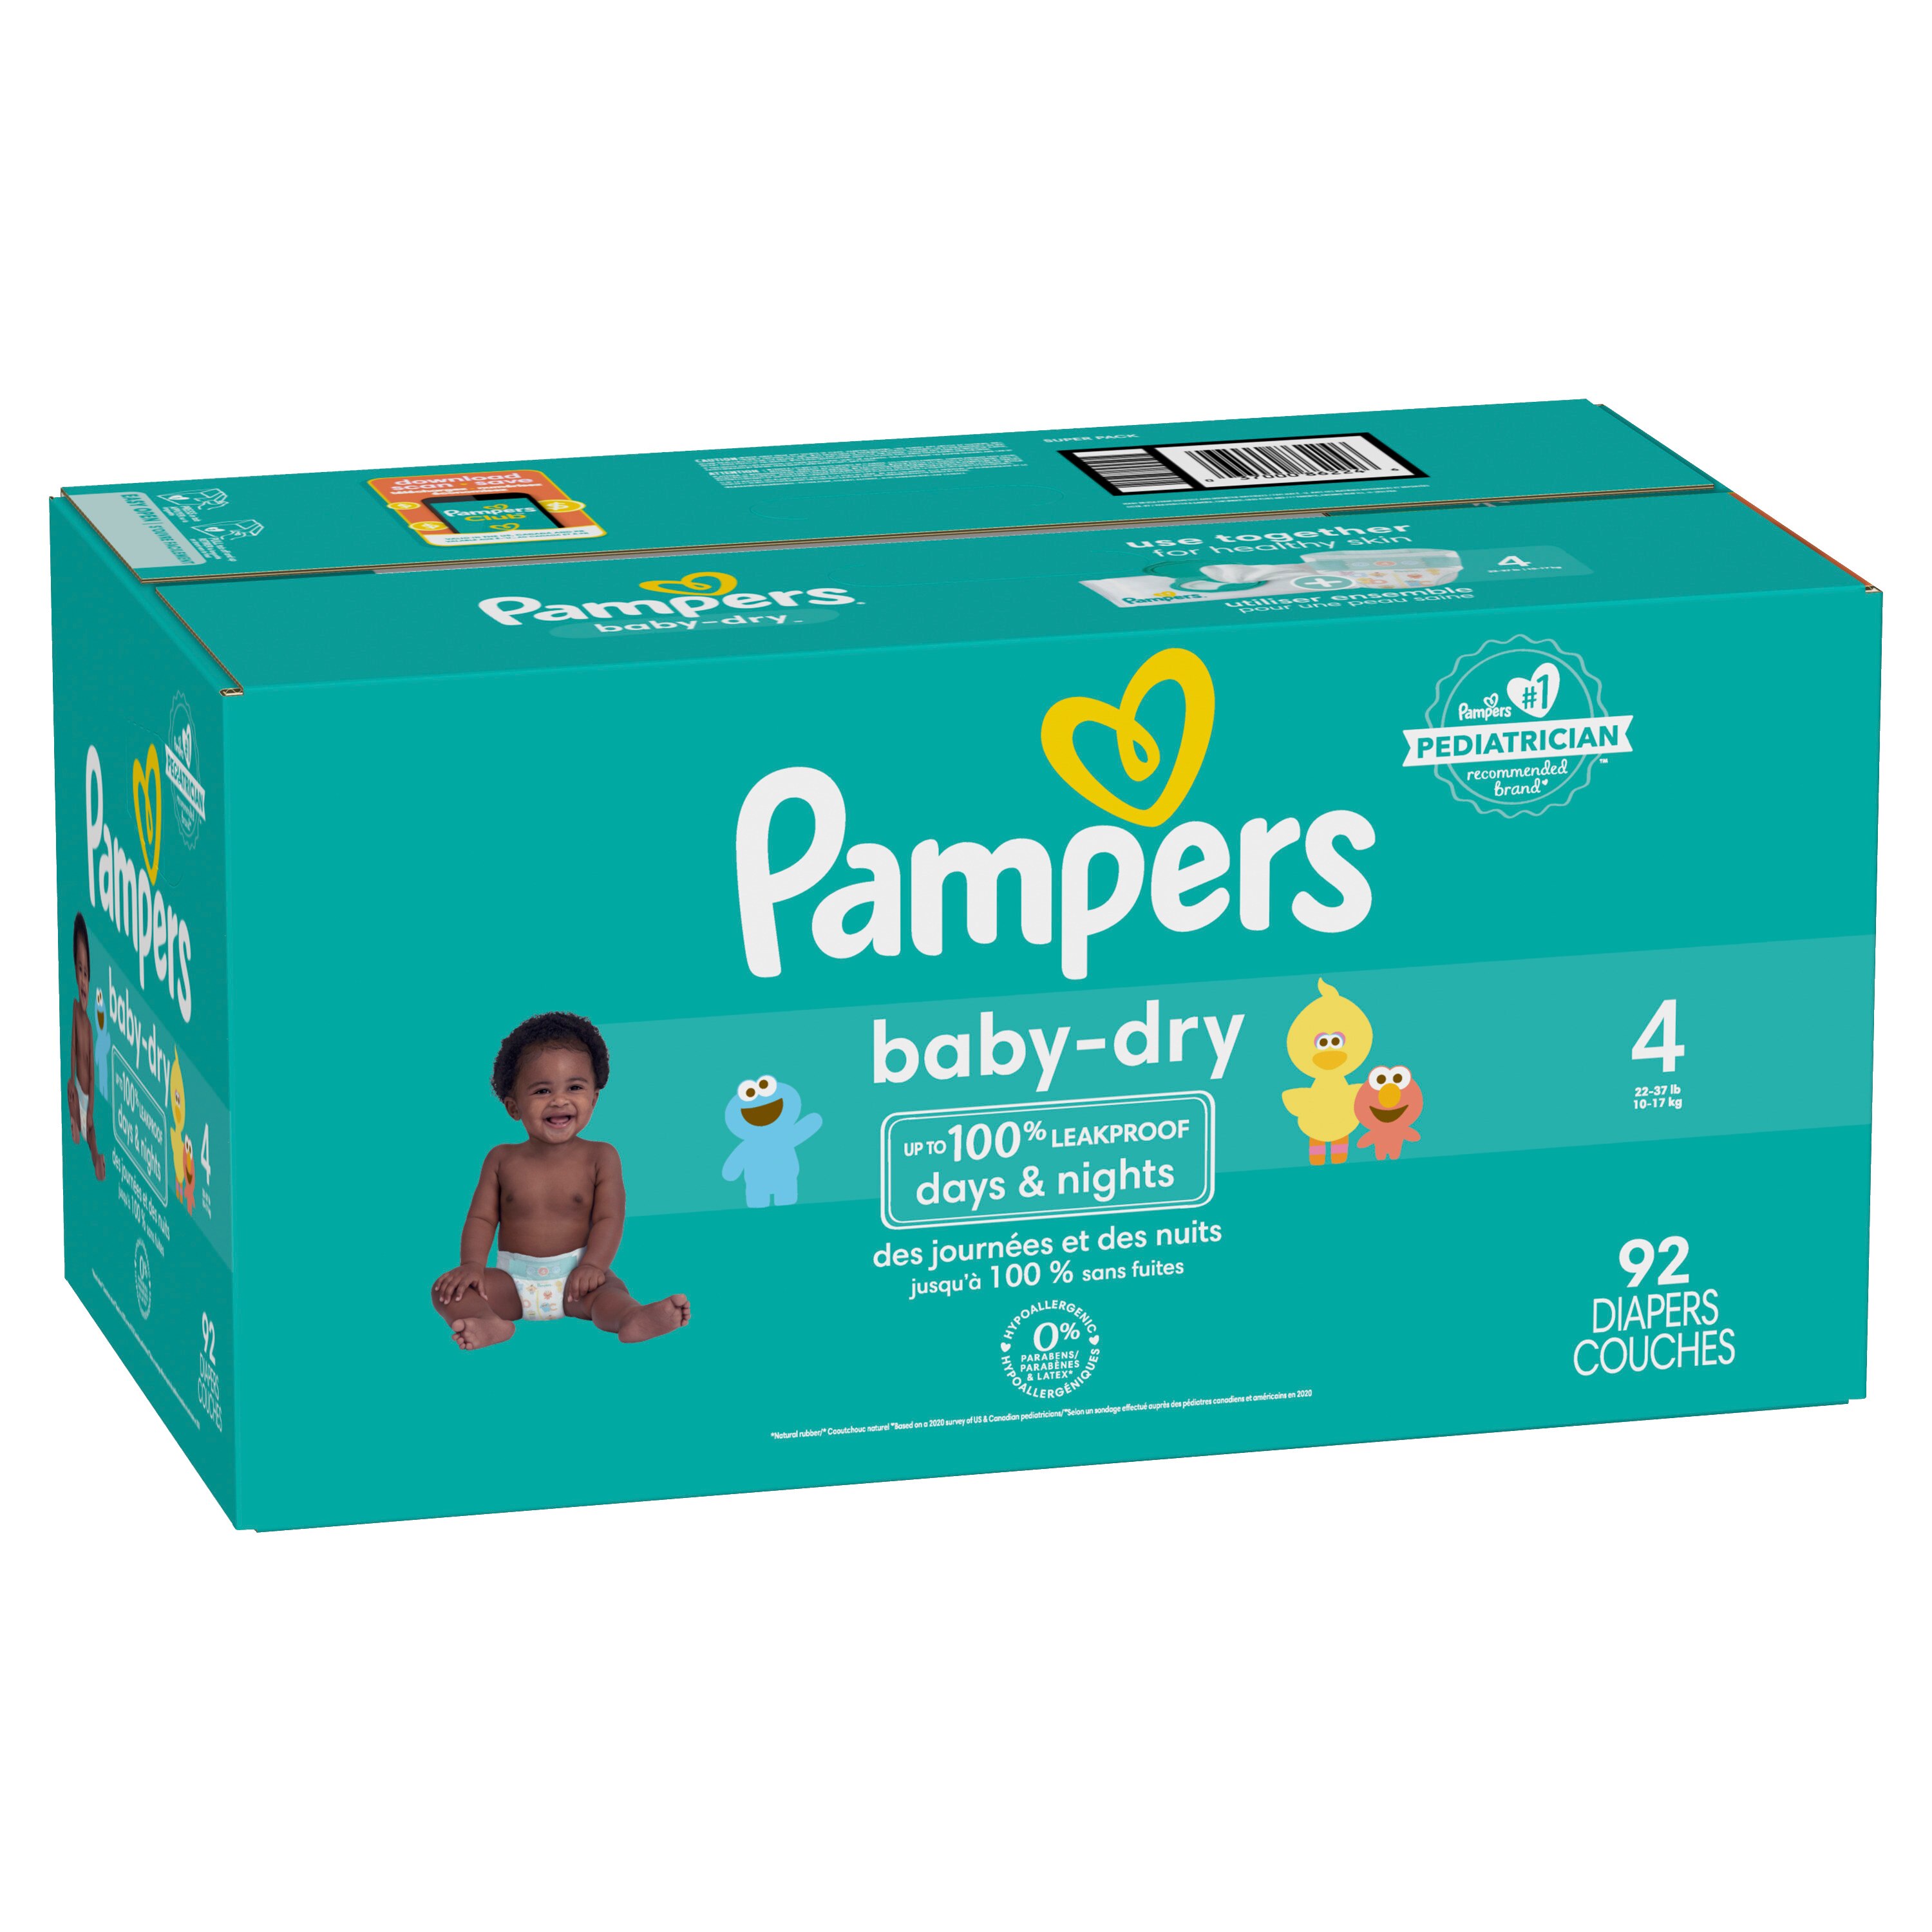 vervagen afbetalen transfusie Pampers Baby Dry Pack Diapers, Size 4, 92 Count - CVS Pharmacy